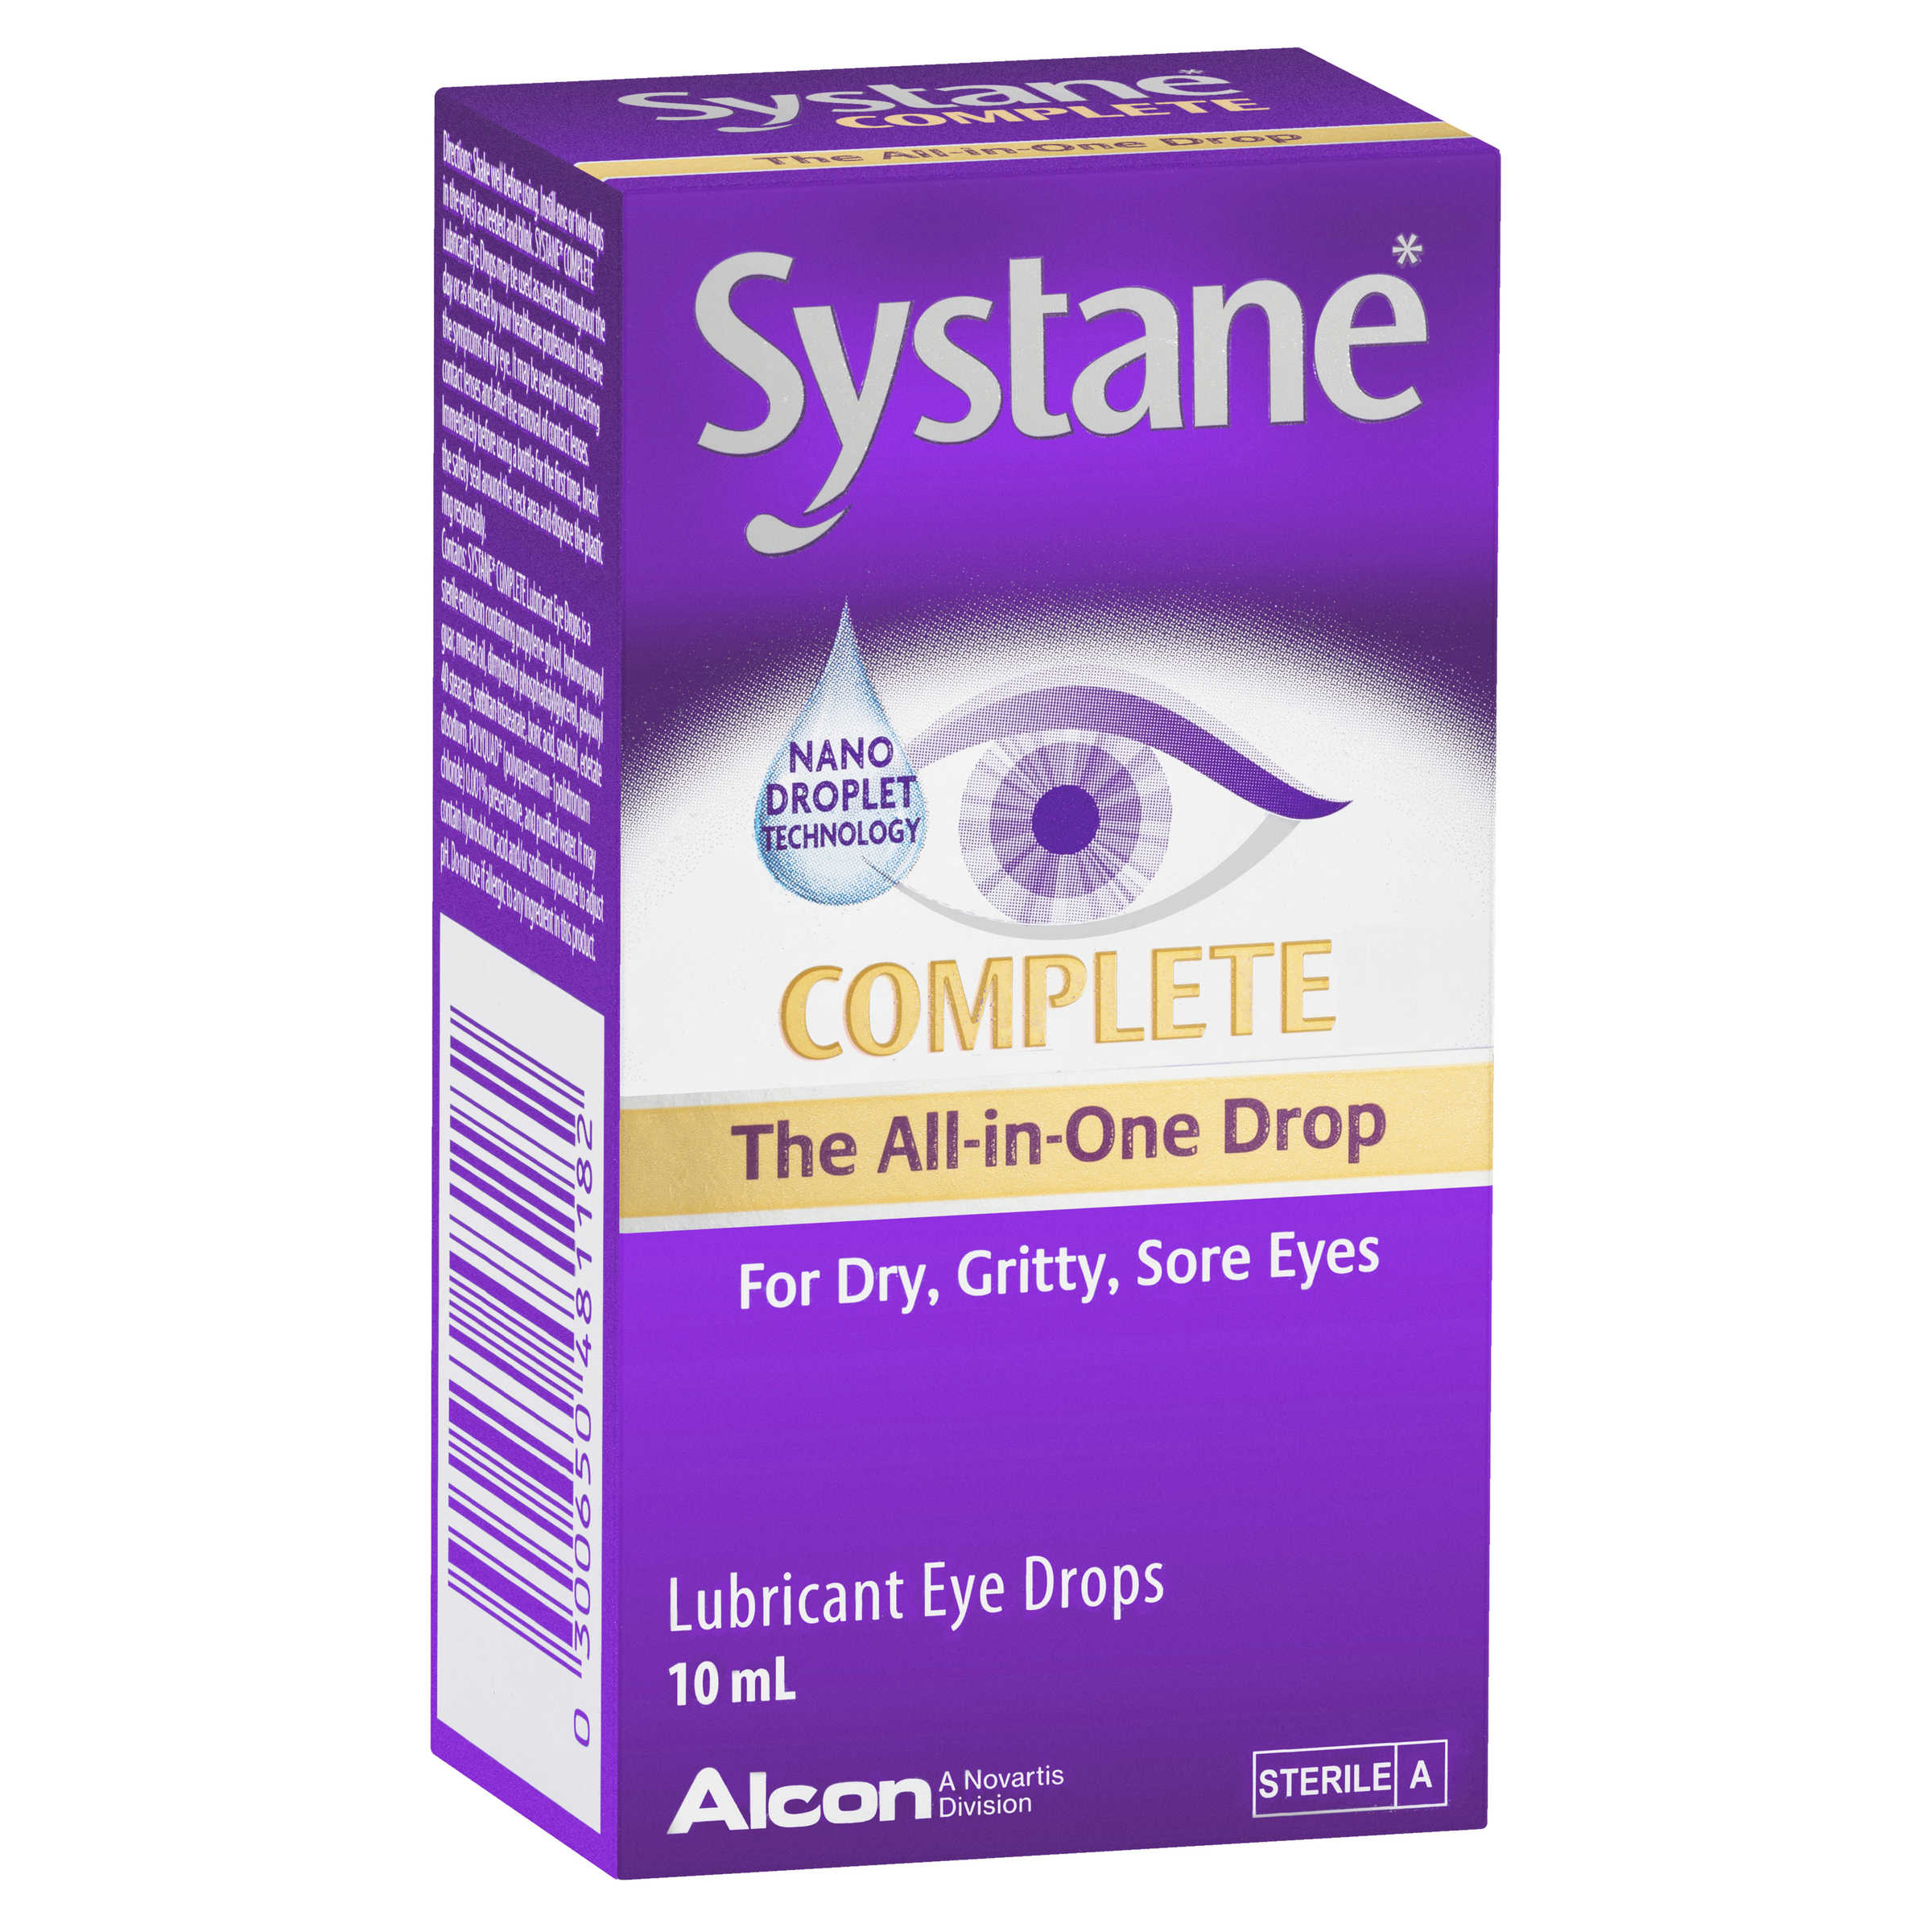 systane-complete-lubricant-eye-drops-10ml-0